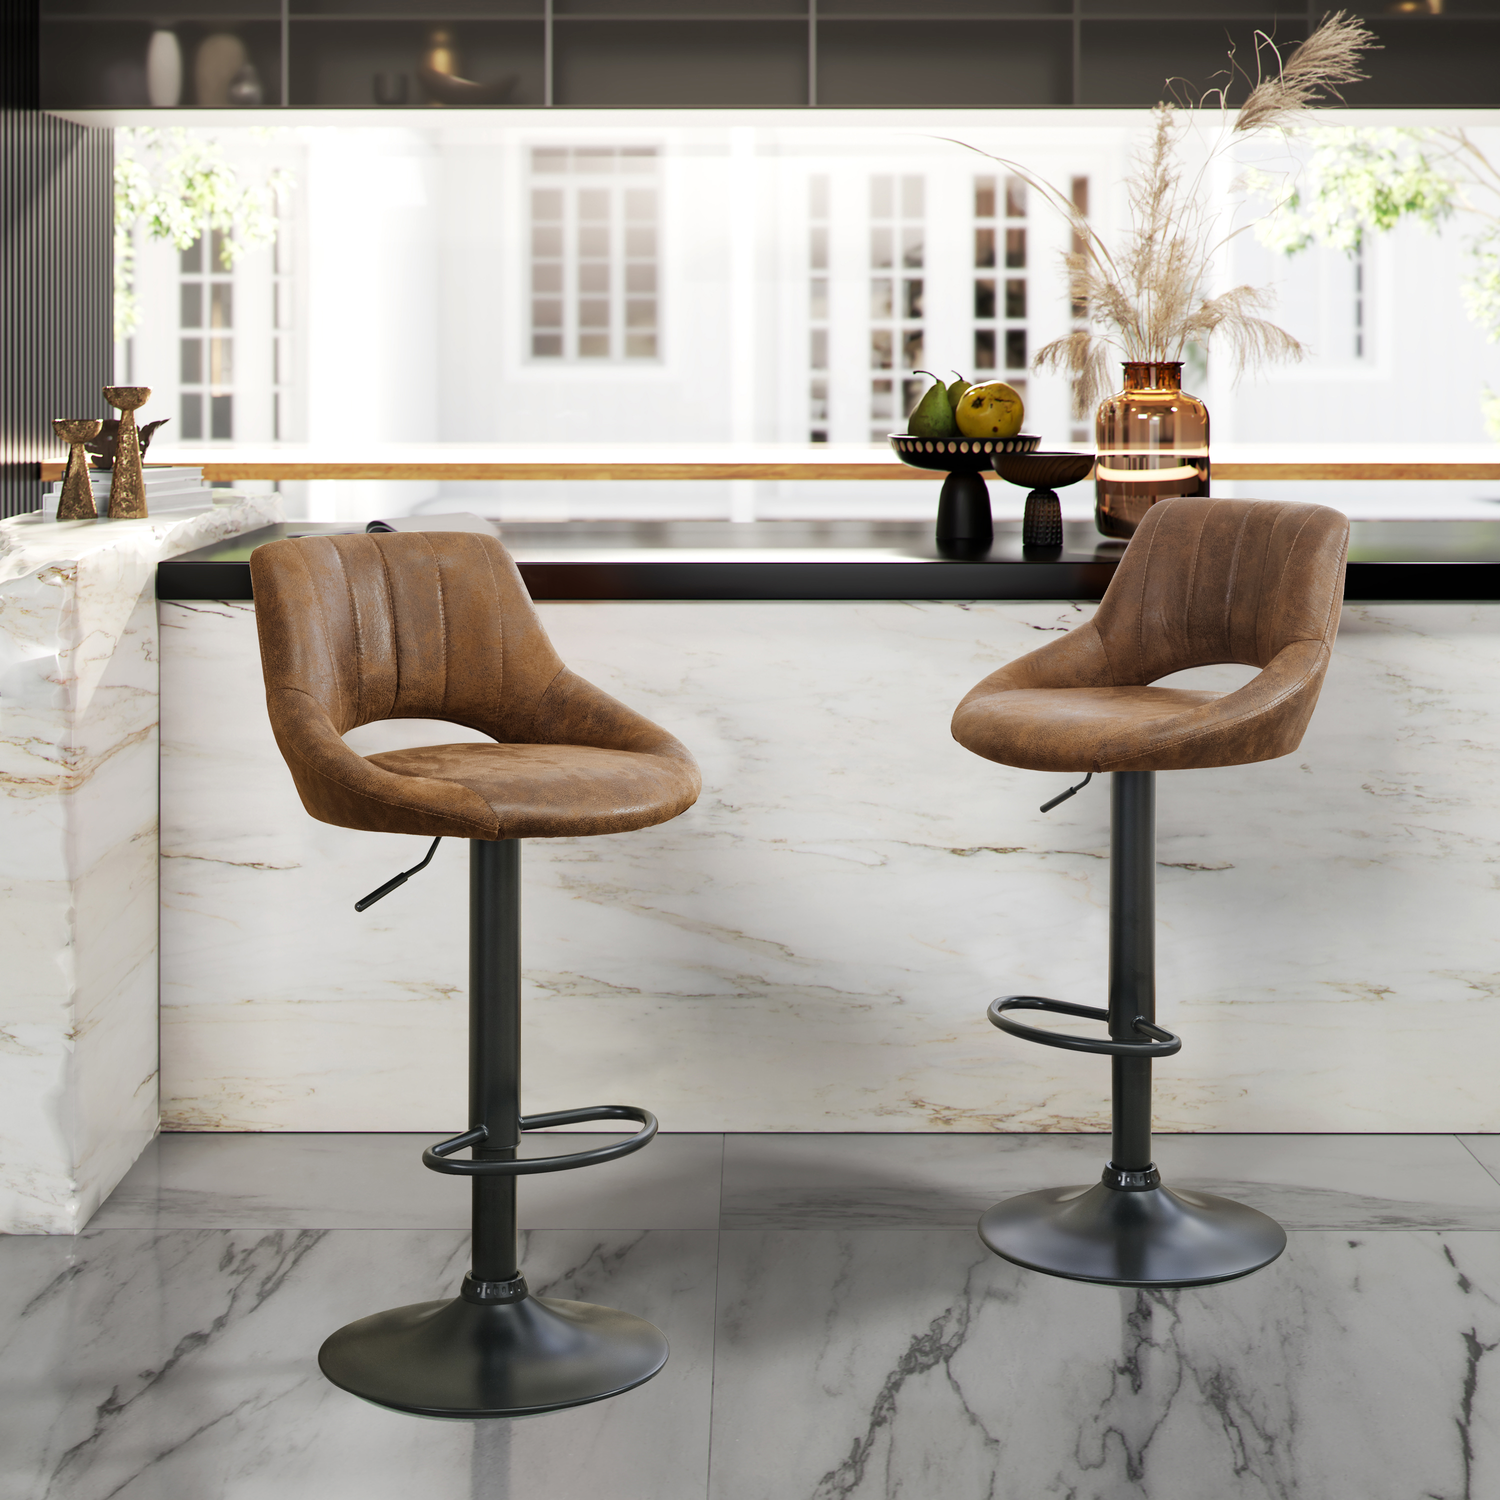 Bar Stools Set of 2 Faux Leather Counter Height Brown